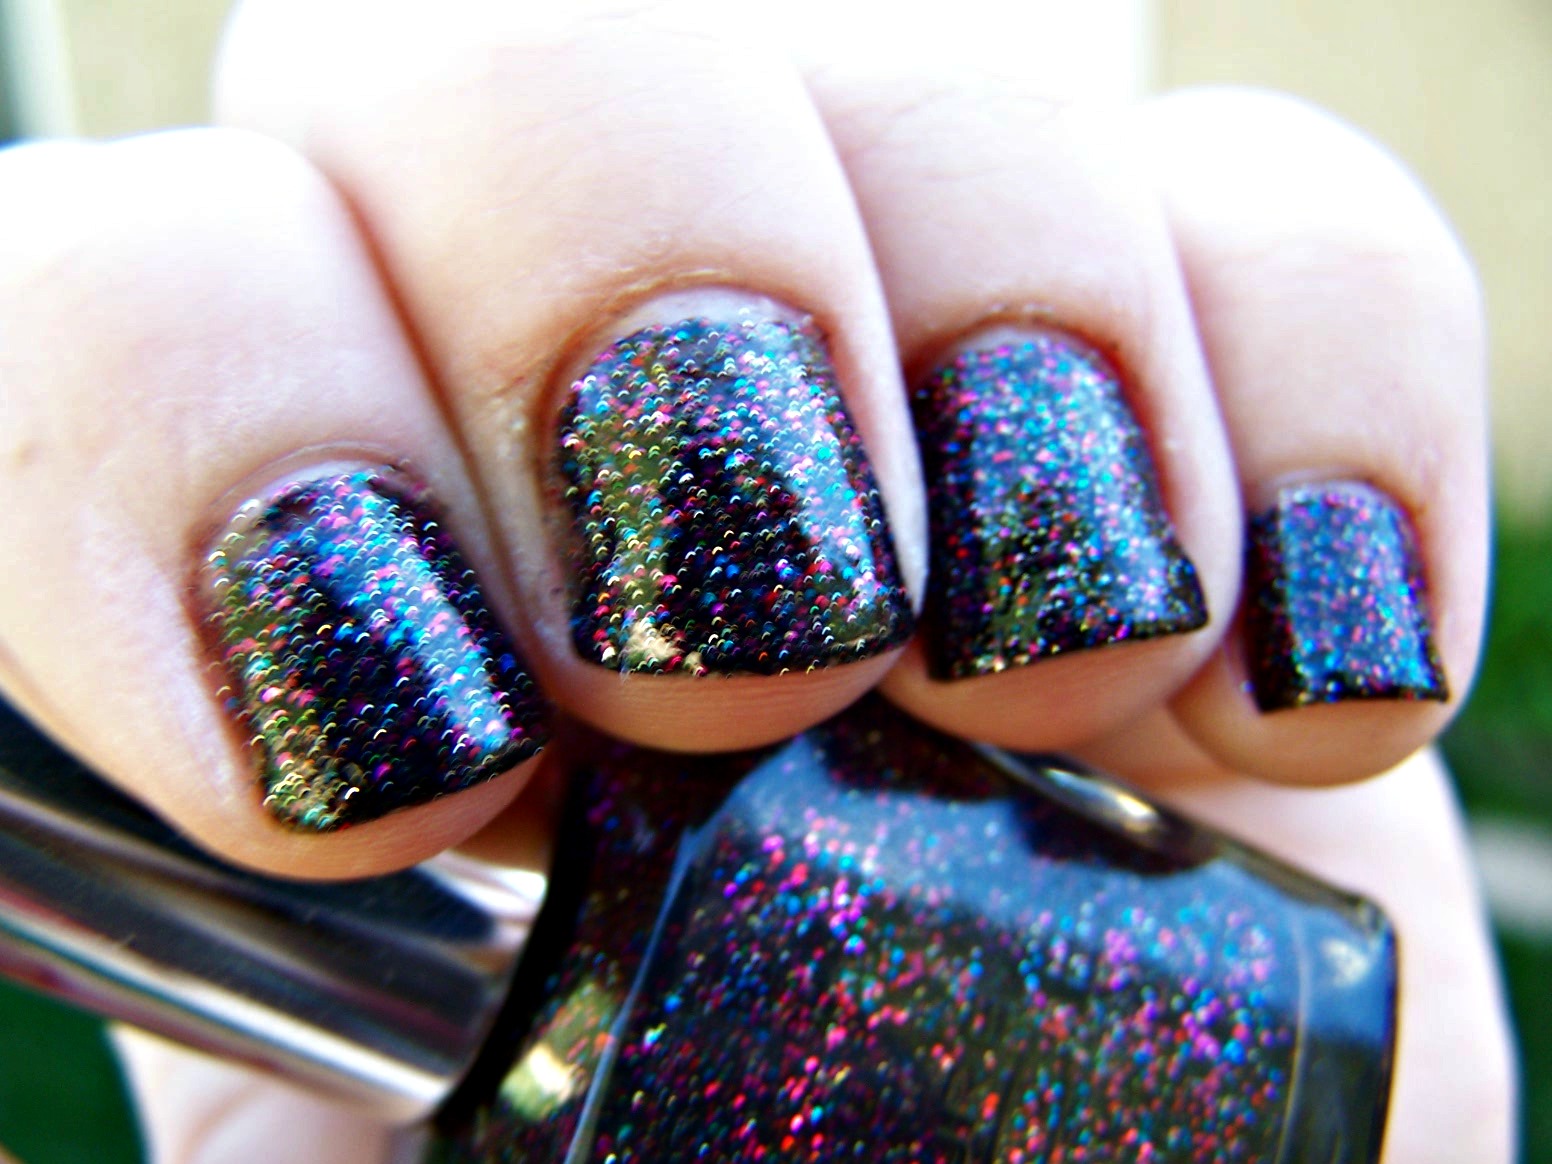 Swatch Me Now: Pure Ice Private Show (Butter London The Black Knight dupe)